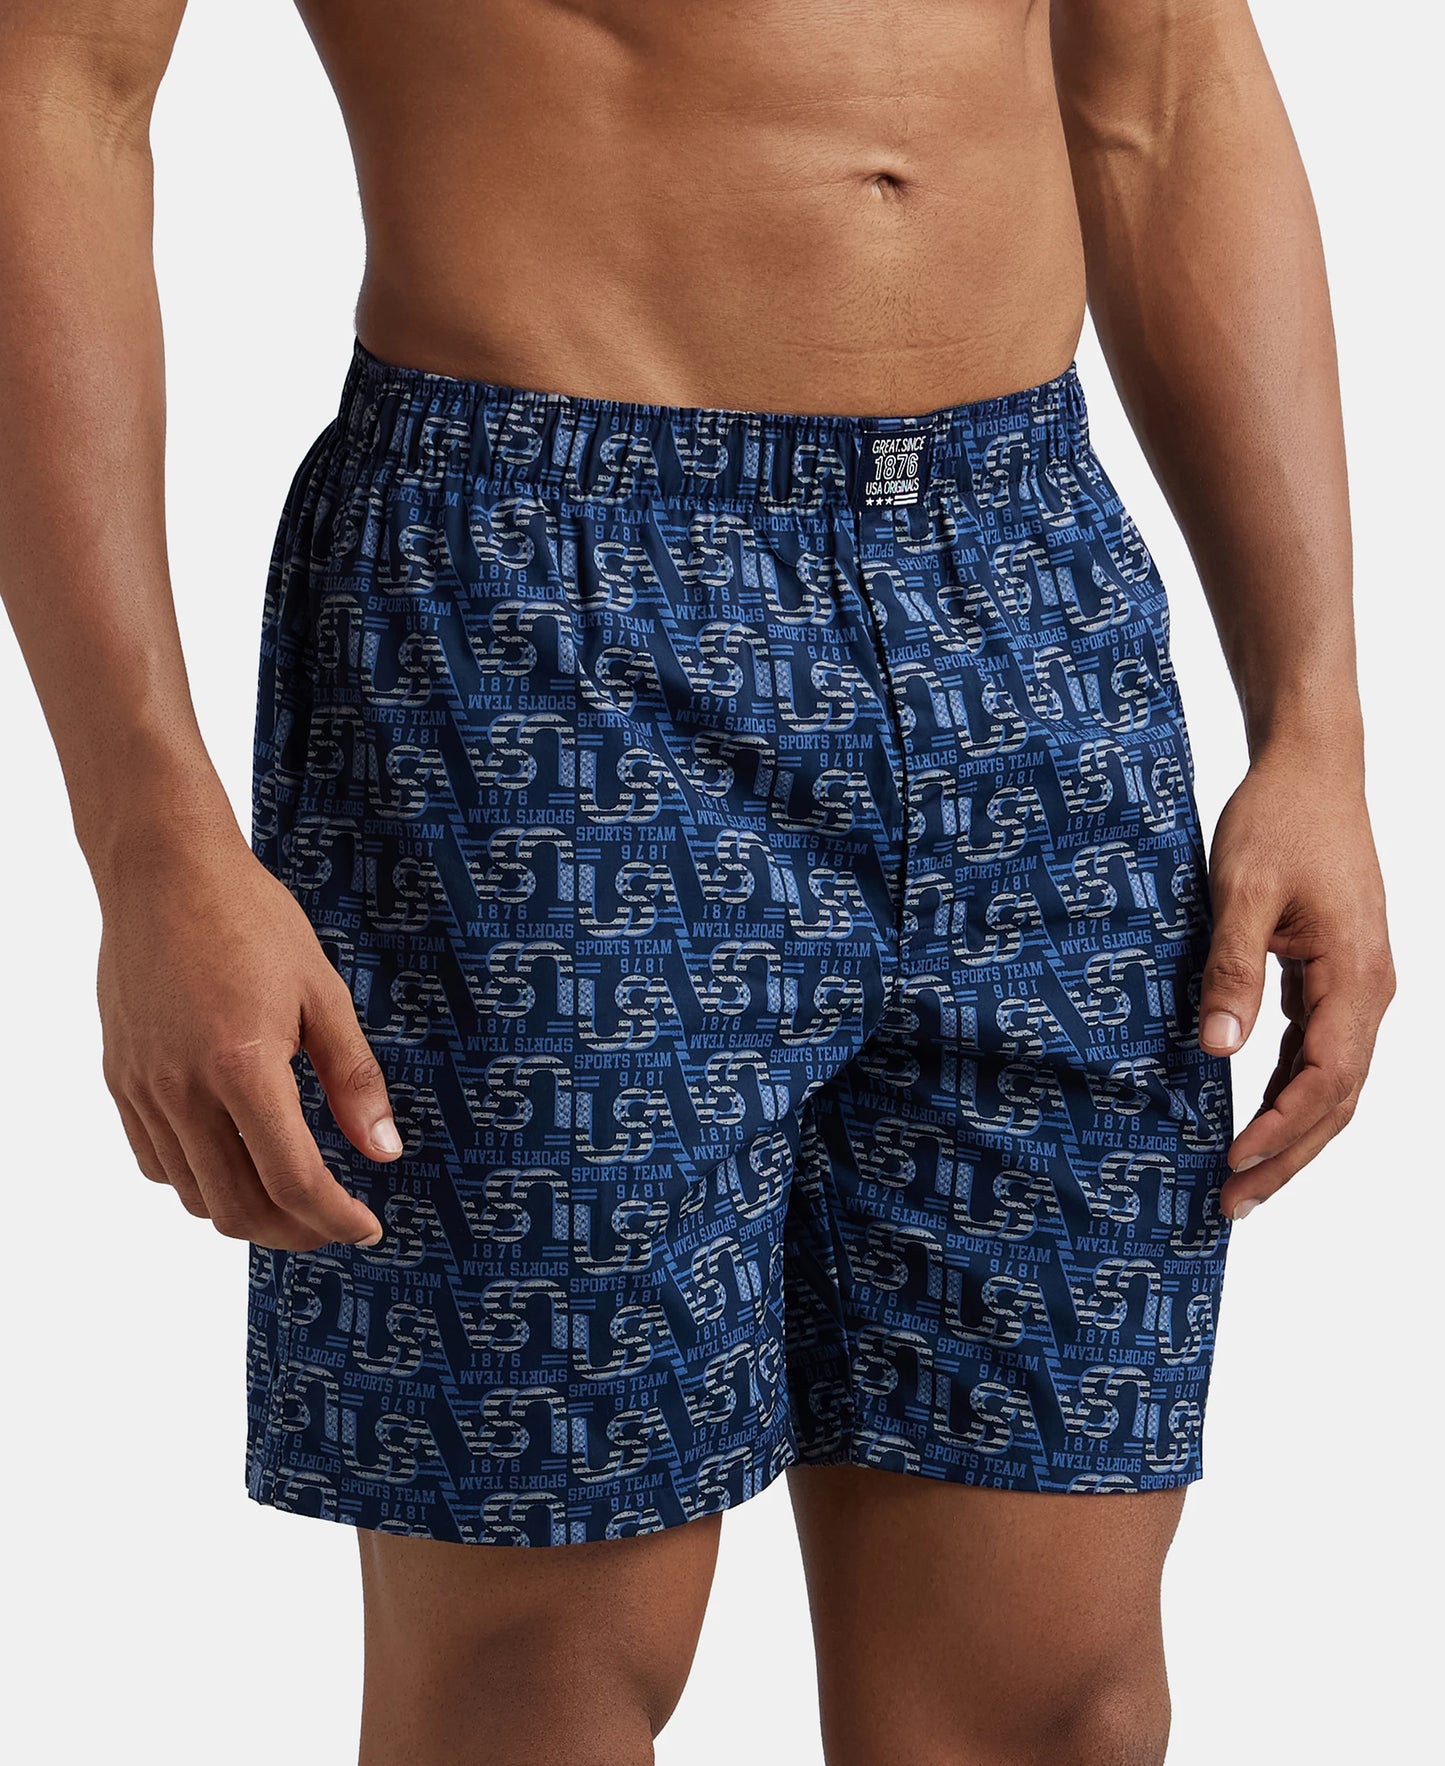 Super Combed Mercerized Cotton Woven Printed Boxer Shorts with Side Pocket - Navy Nickle-4